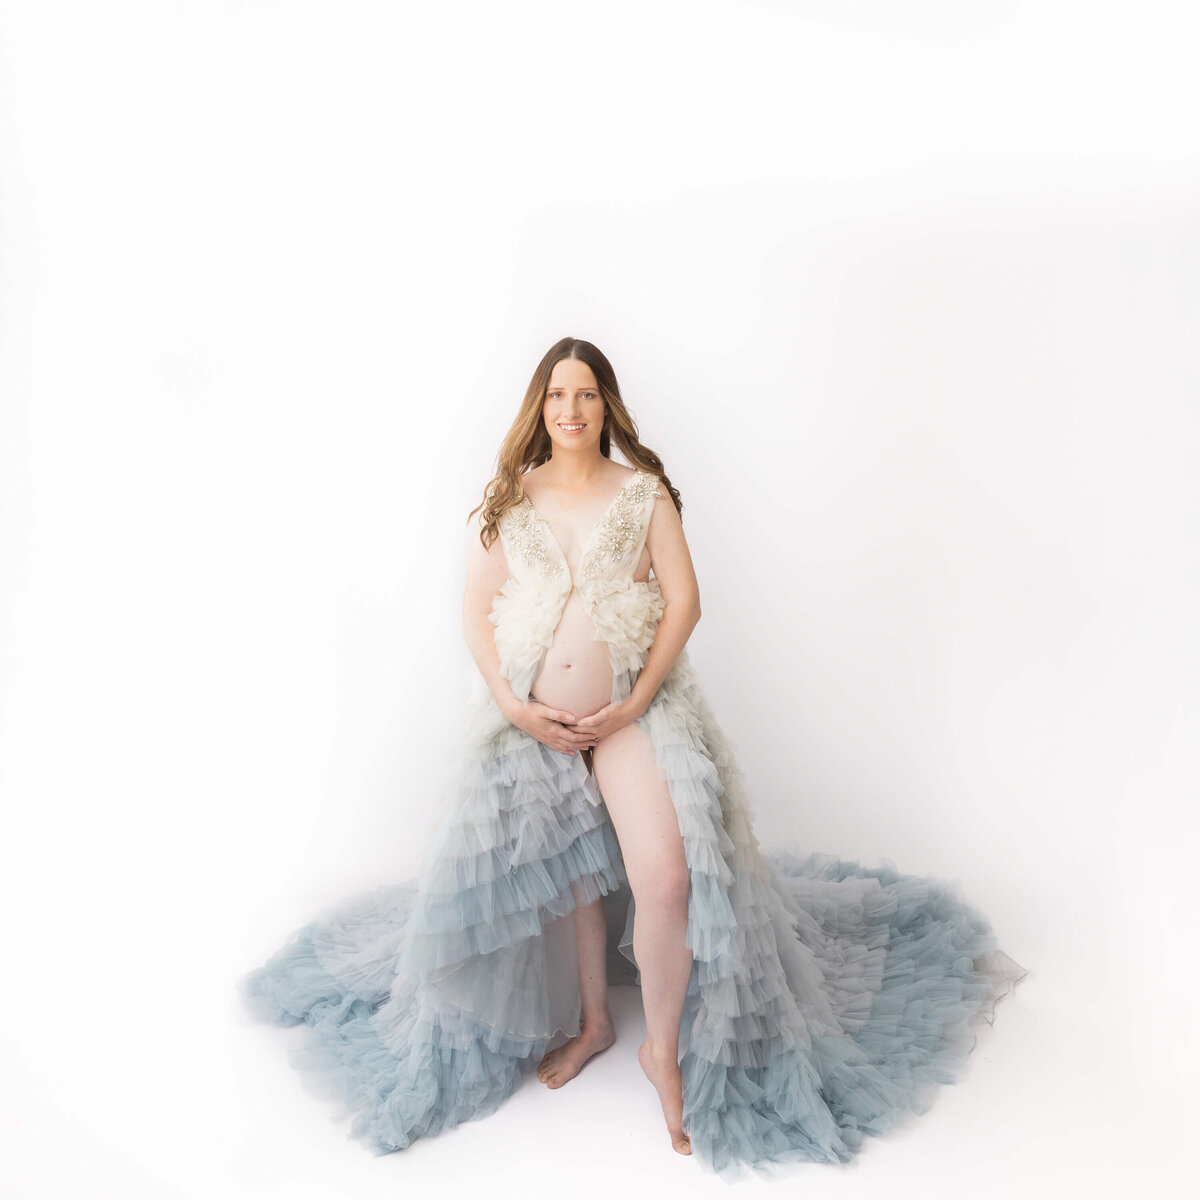 Maternity Studio Session with hair and make upWeb Res 14